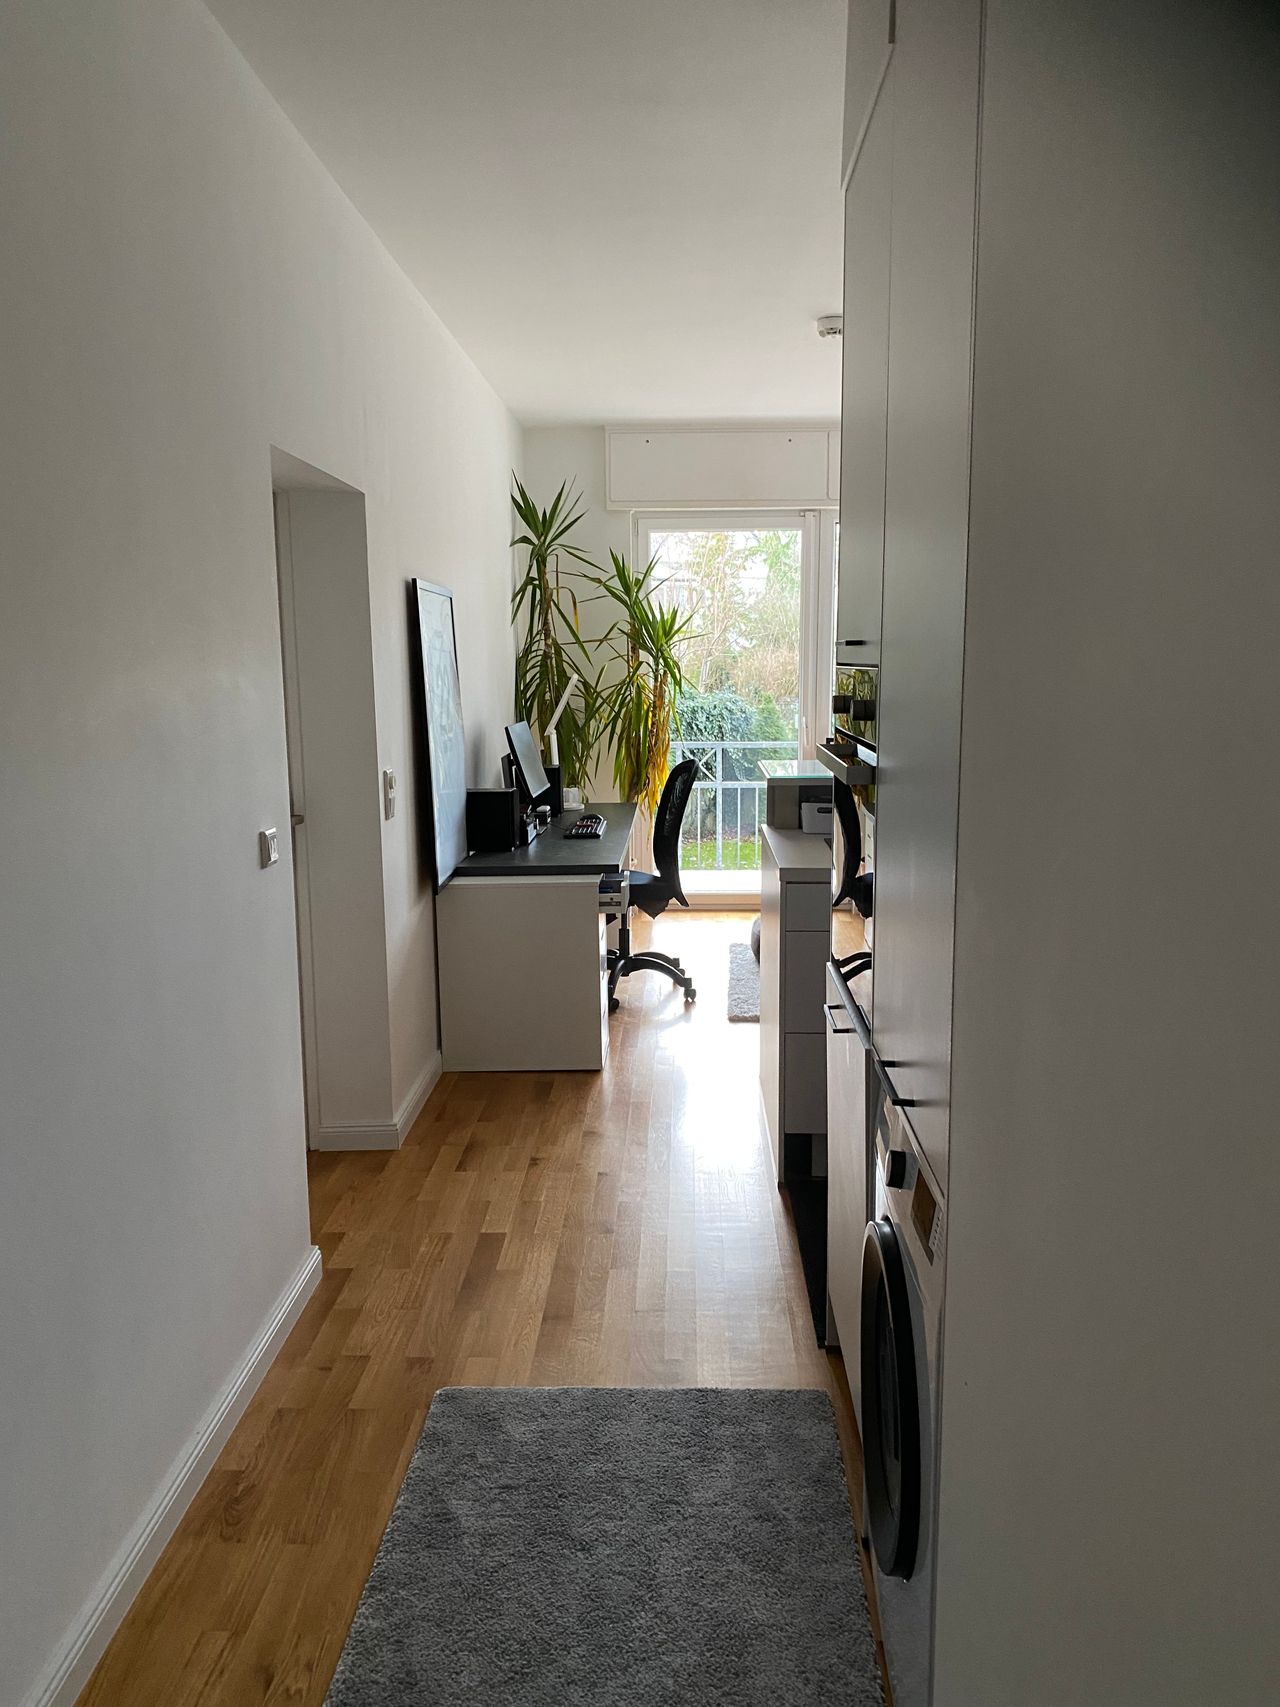 Sunny, fully furnished and newly renovated flat in Schmargendorf/Wilmersdorf close to Freie University (FU)